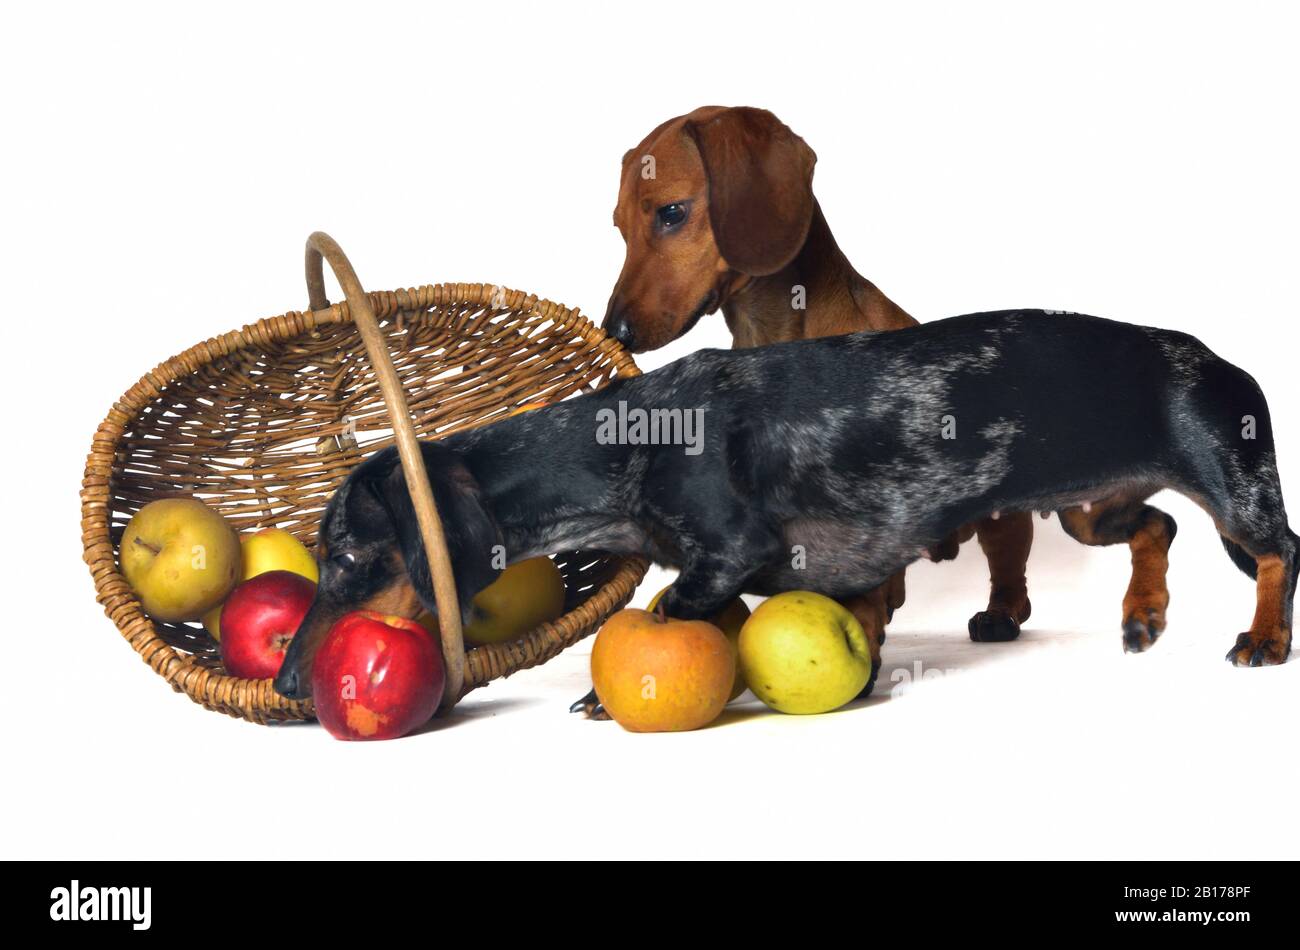 Short-haired Dachshund, Short-haired sausage dog, domestic dog (Canis lupus f. familiaris), two dachshunds looking curiously into an apple basket Stock Photo